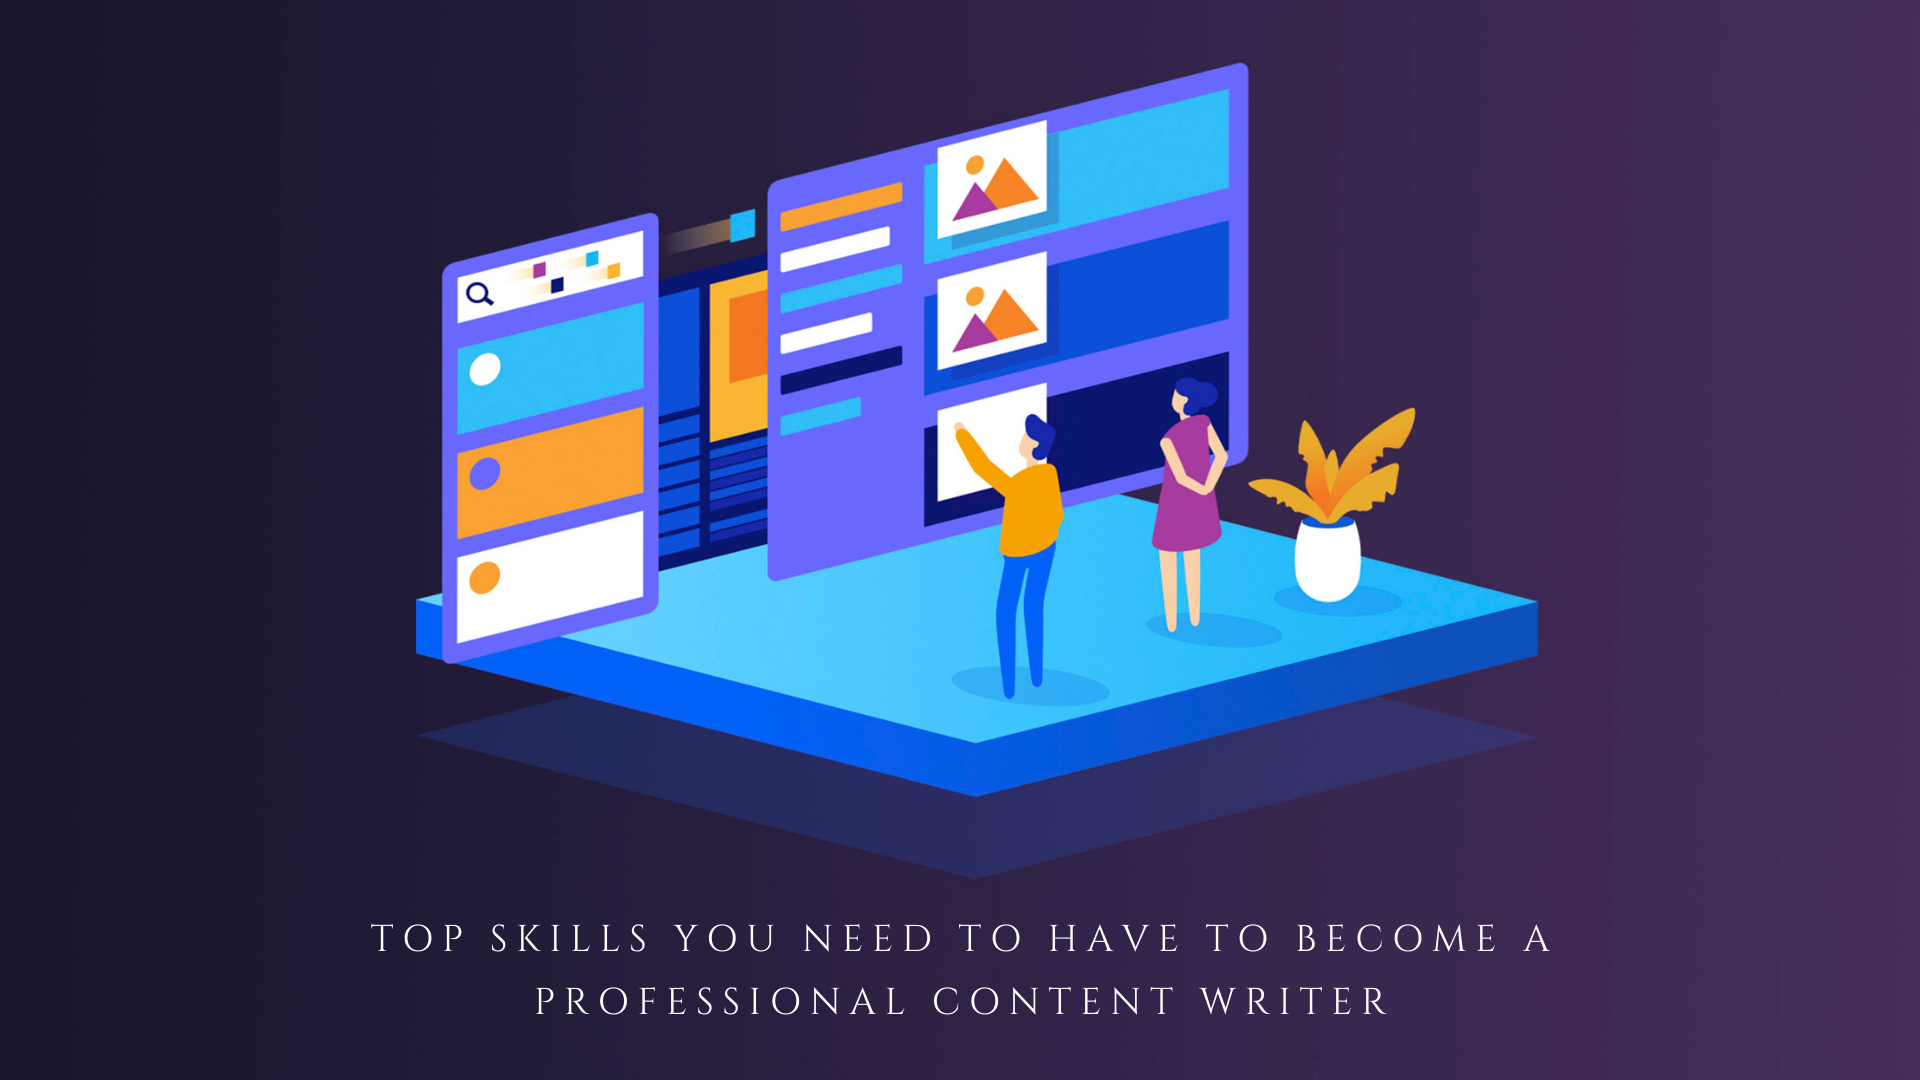 Top Skills You Need to Have to Become a Professional Content Writer